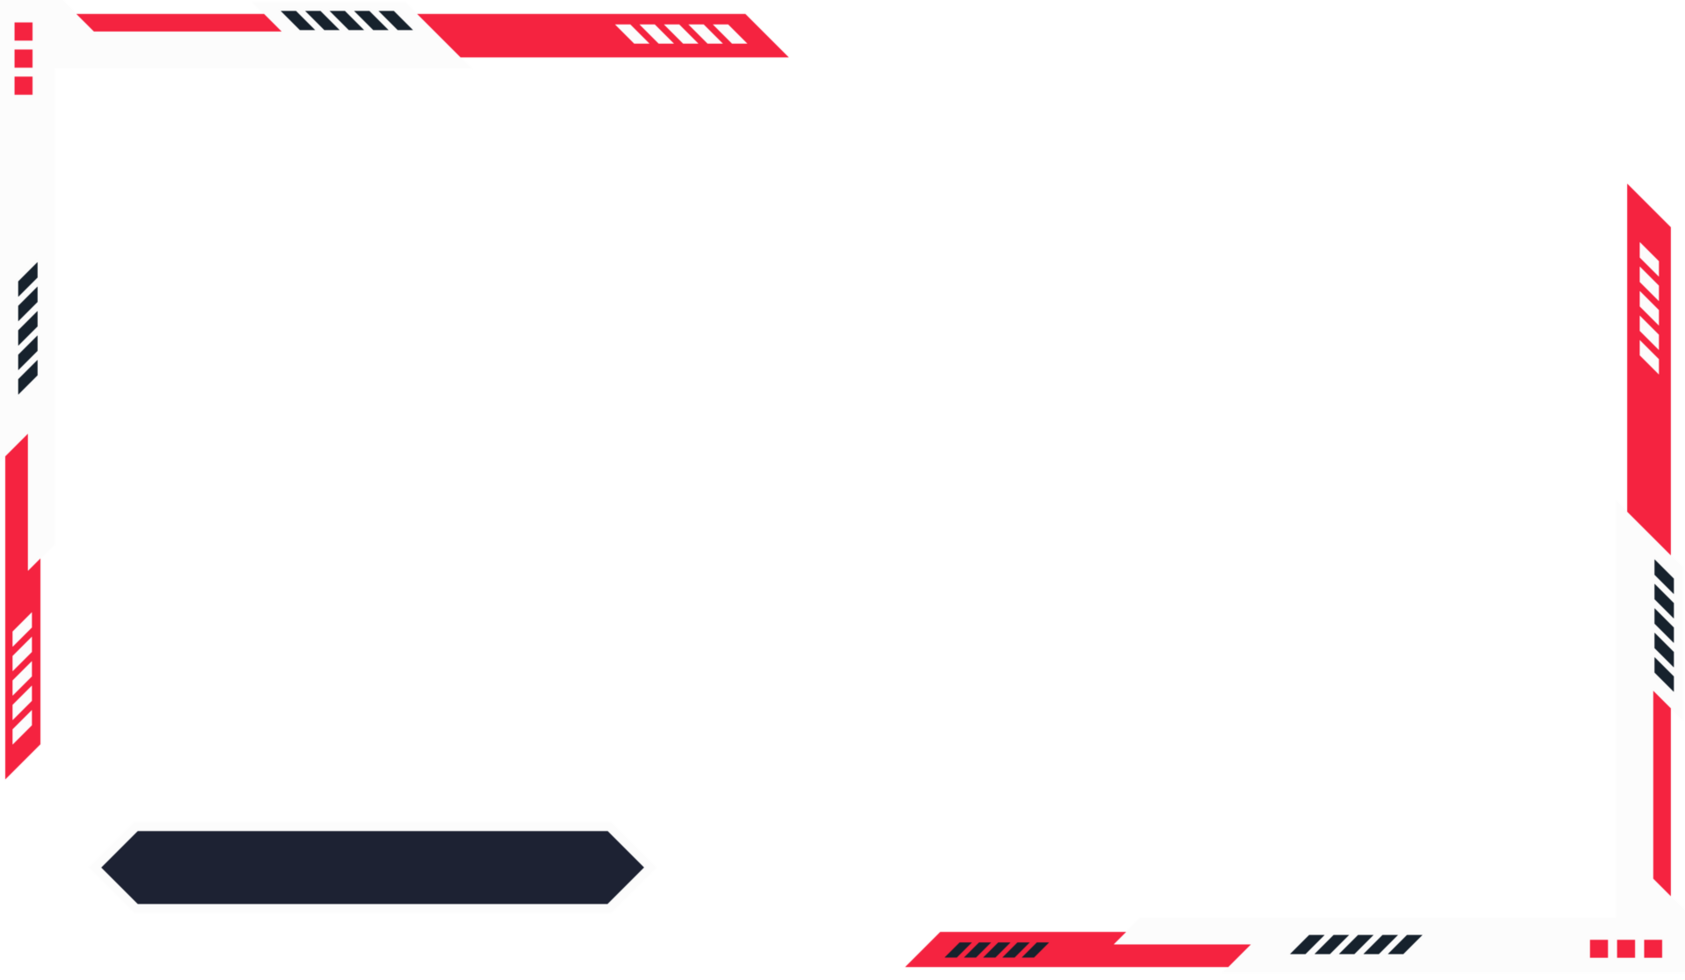 Gamer broadcast screen panel decoration with red and white colors. Futuristic gaming screen interface design for live gamers. Abstract streaming overlay and screen border template png. png